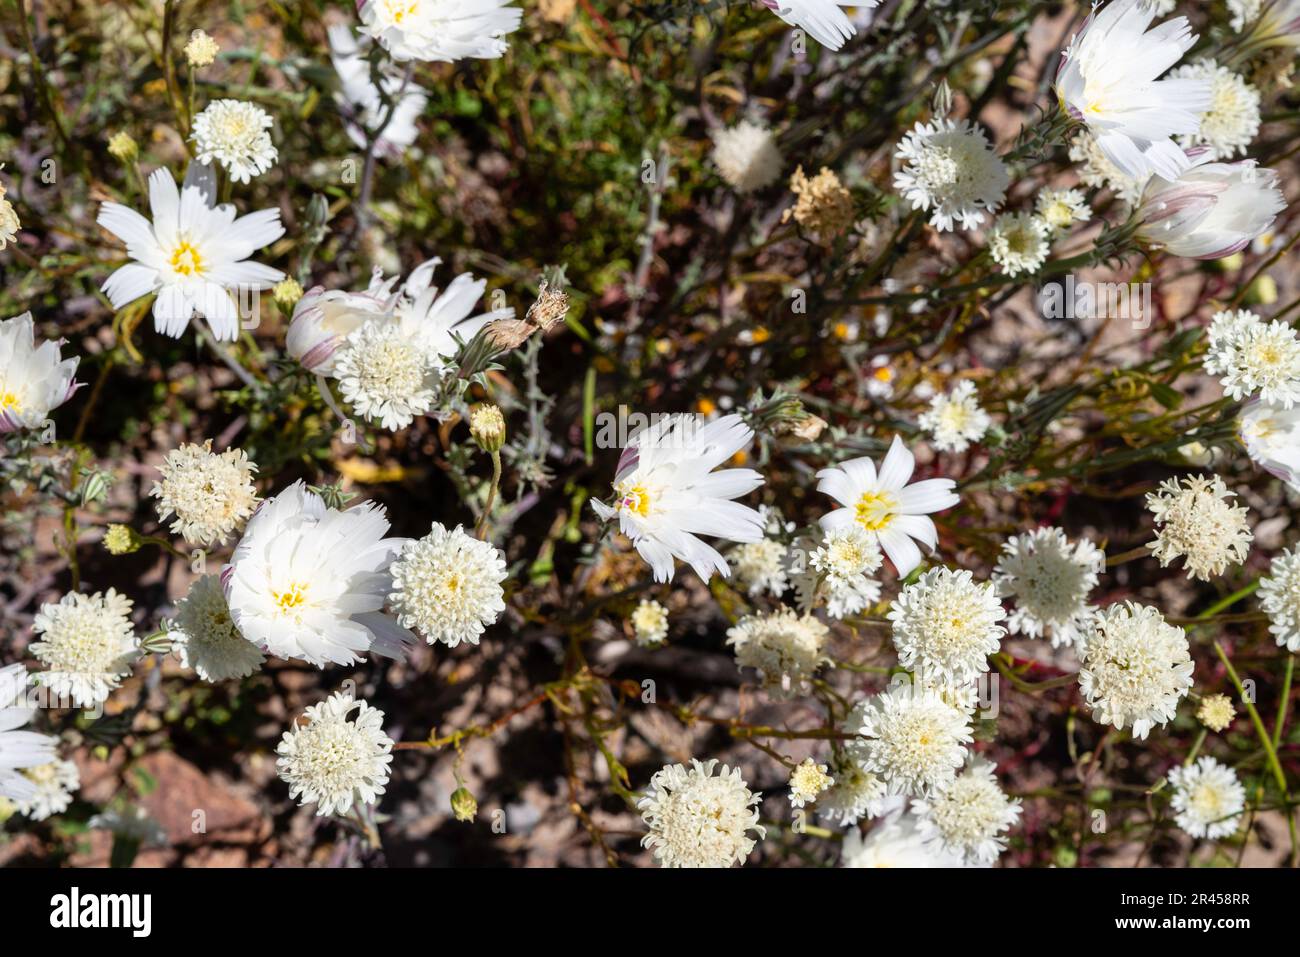 Spring wildflowers bloom in the desert, along the Oatman Highway, south of Oatman, Arizona,  USA on a beautiful spring day. Stock Photo